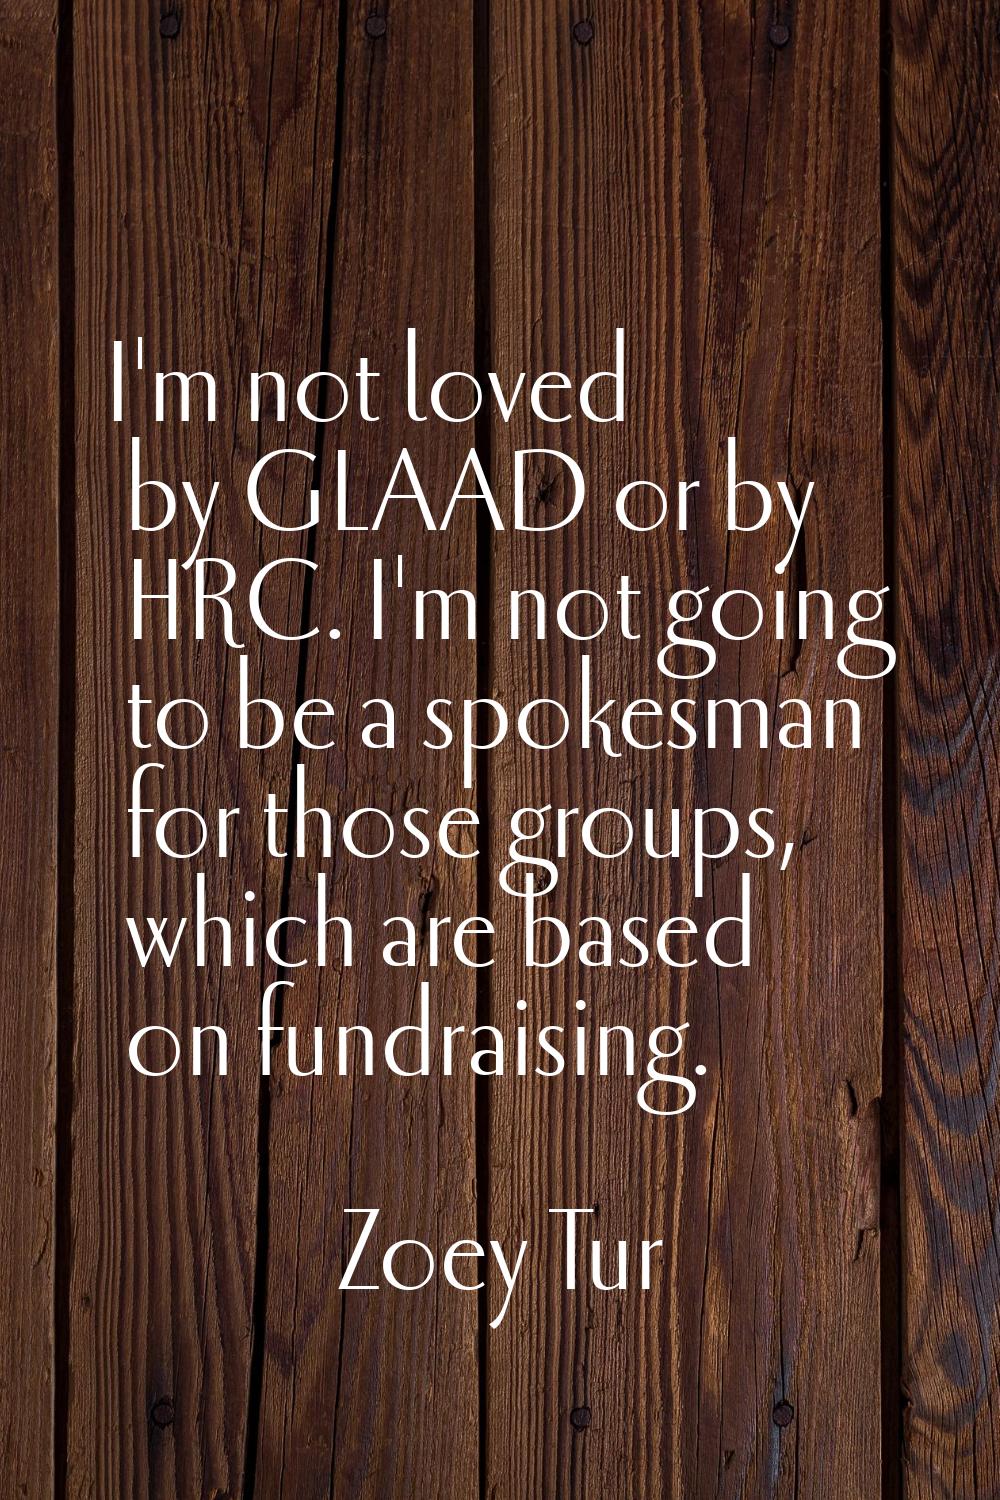 I'm not loved by GLAAD or by HRC. I'm not going to be a spokesman for those groups, which are based